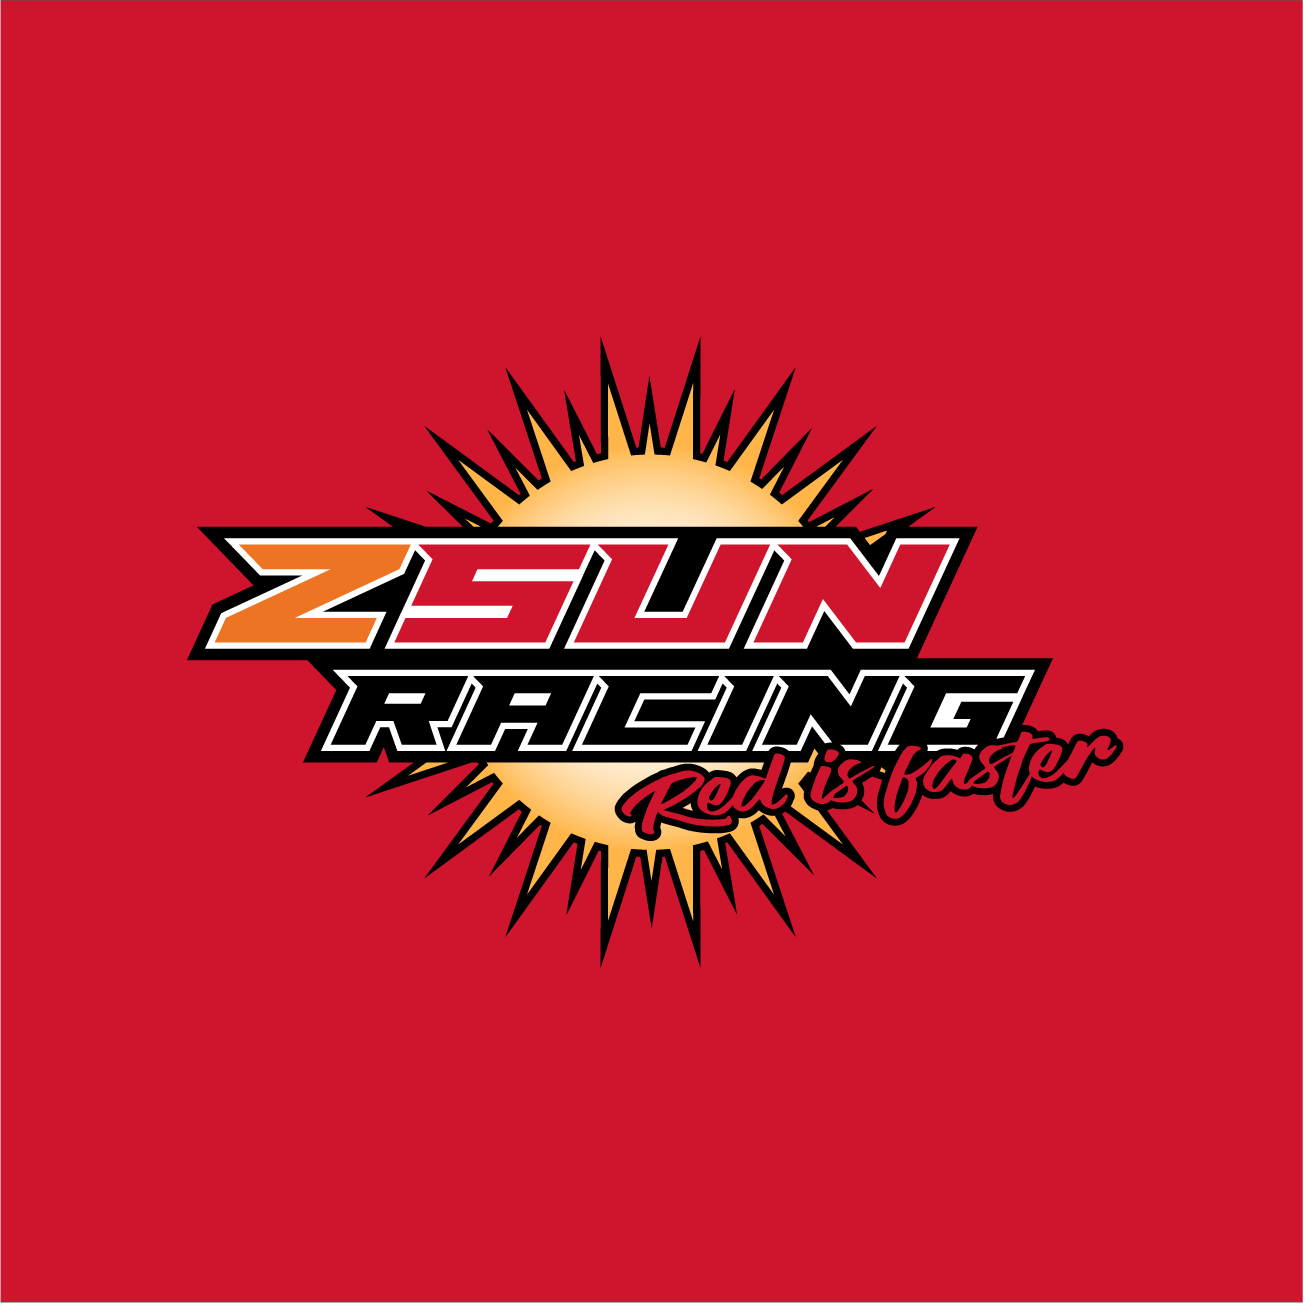 Club Image for ZSUN